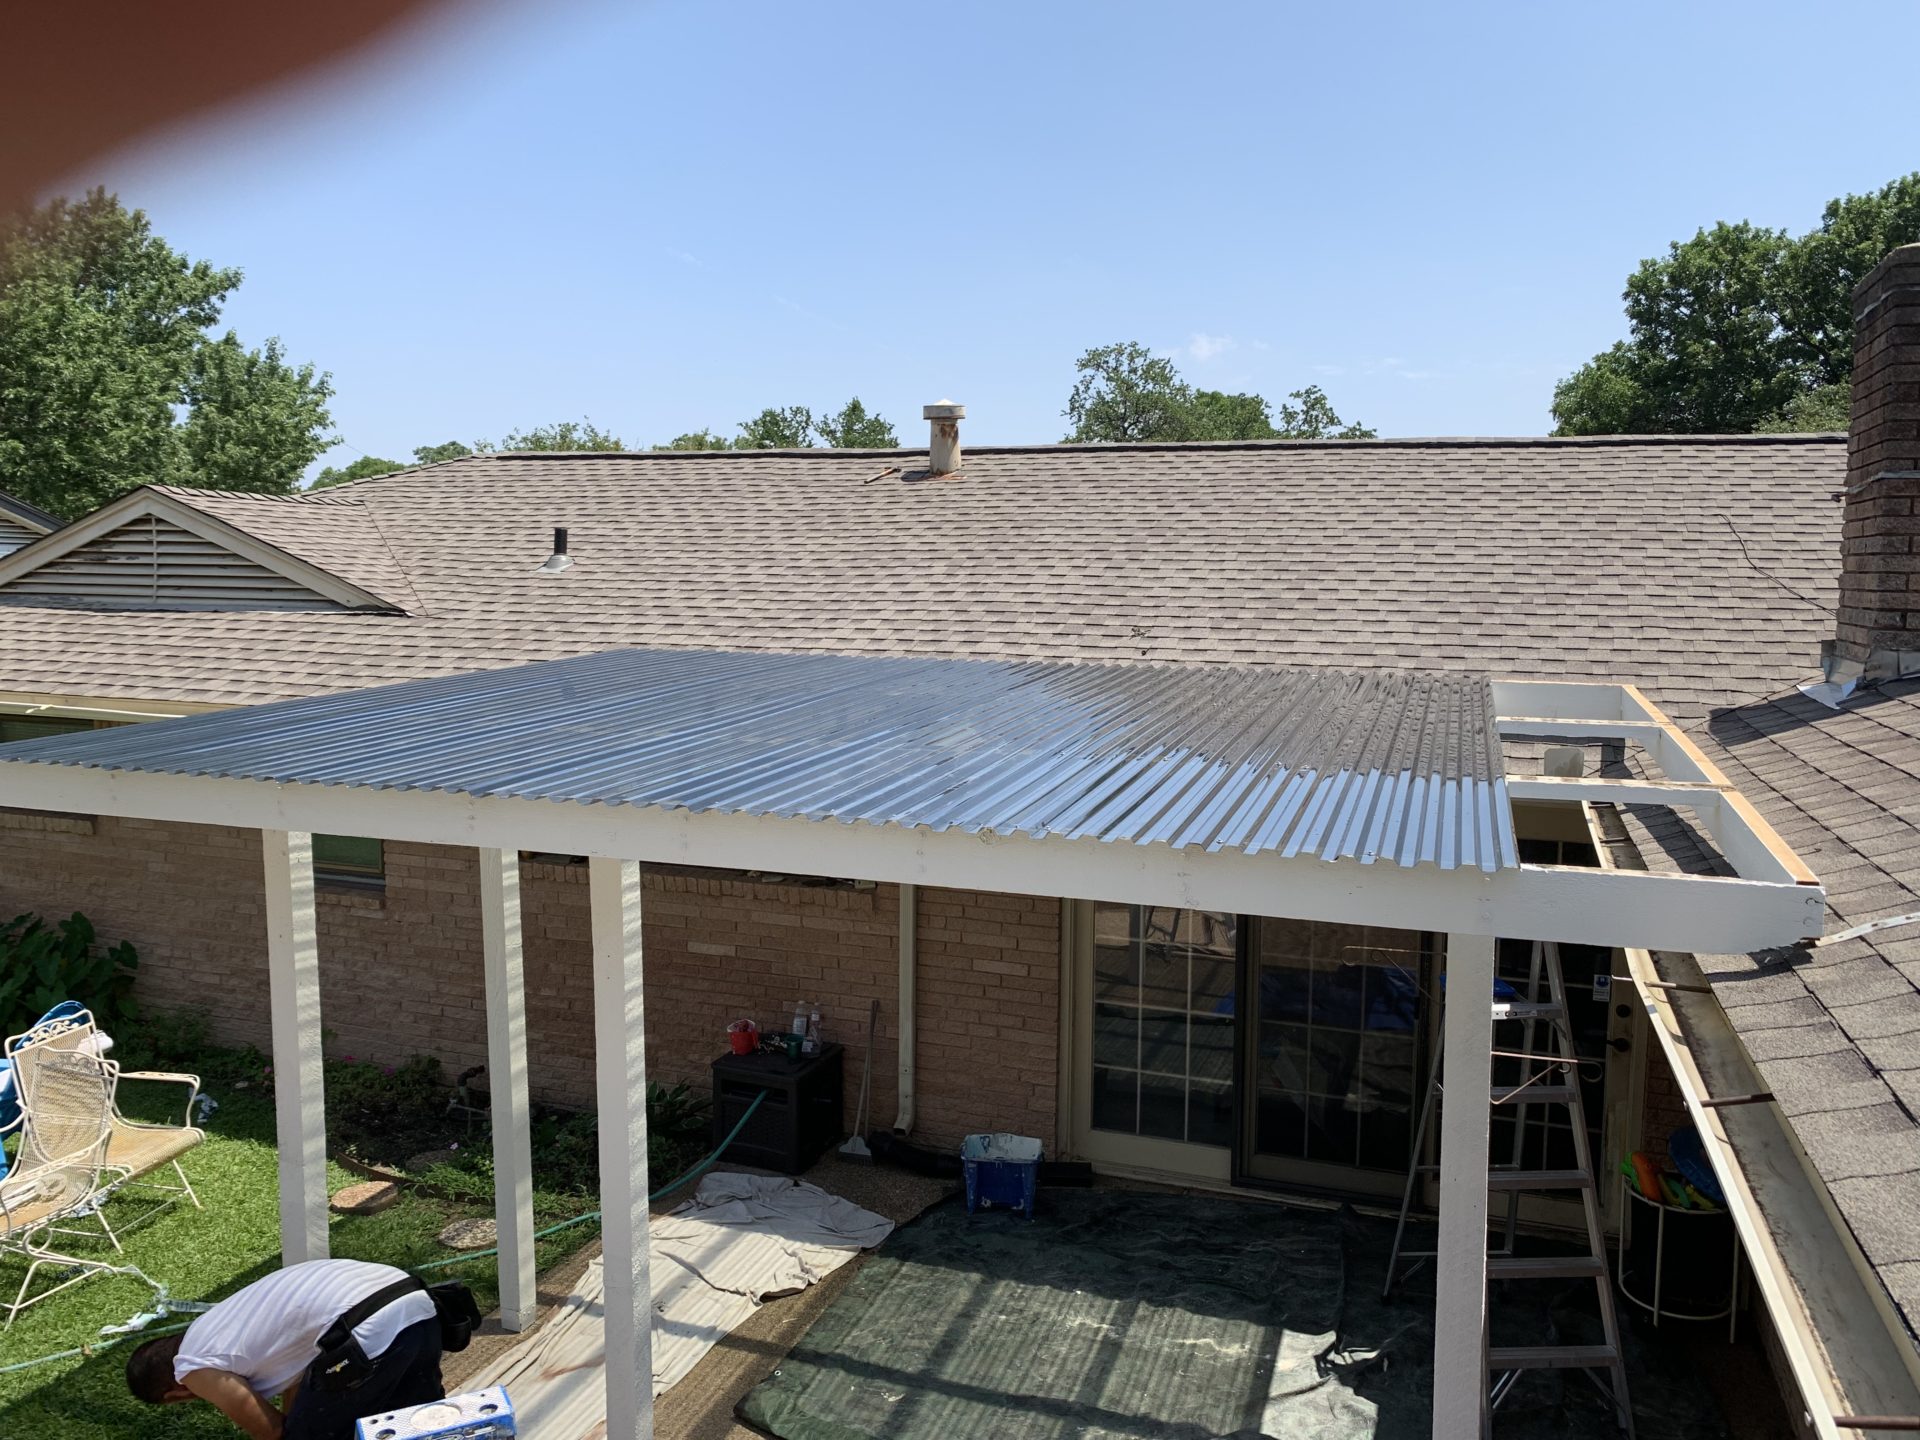 Pergola patio cover under construction that will extend outdoor living space for home in Arlington, TX